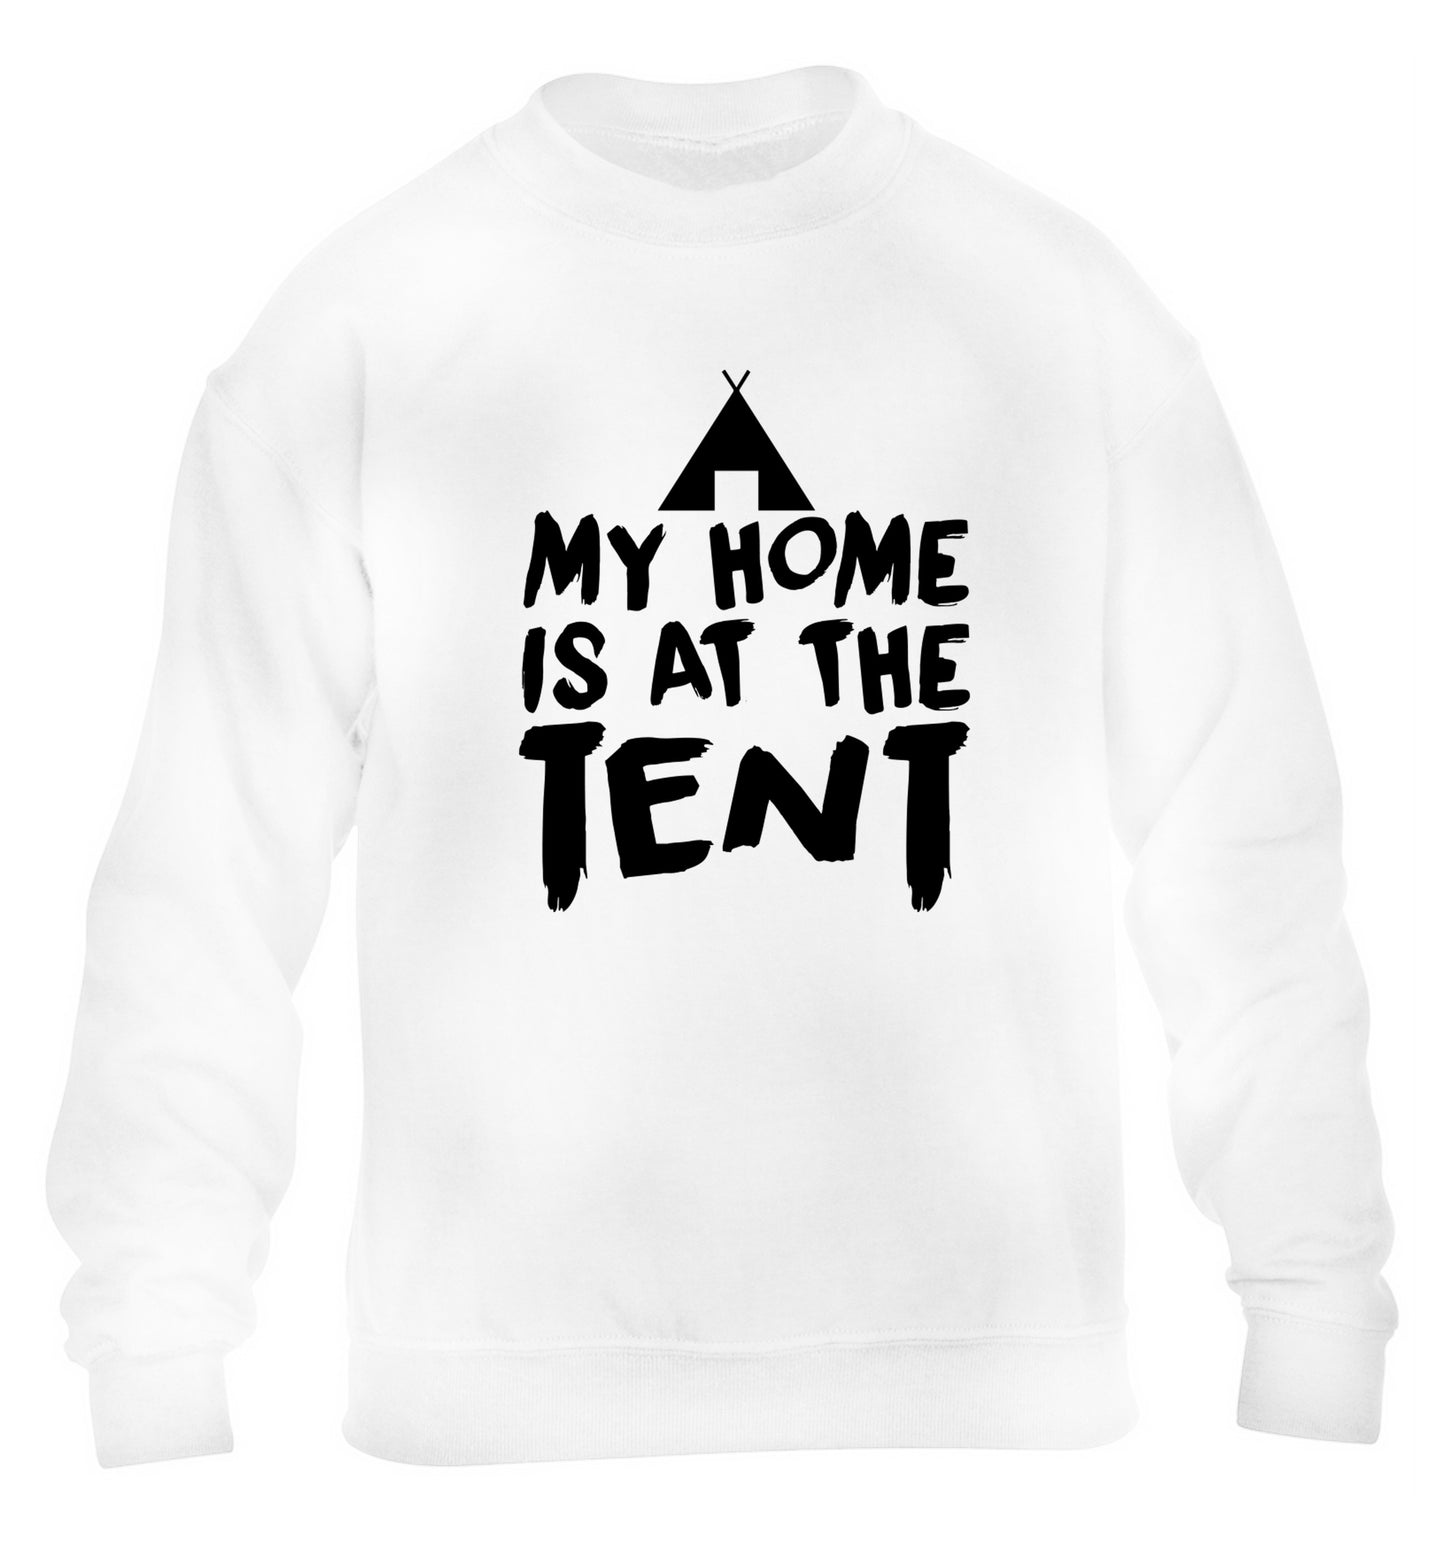 My home is at the tent children's white sweater 12-14 Years